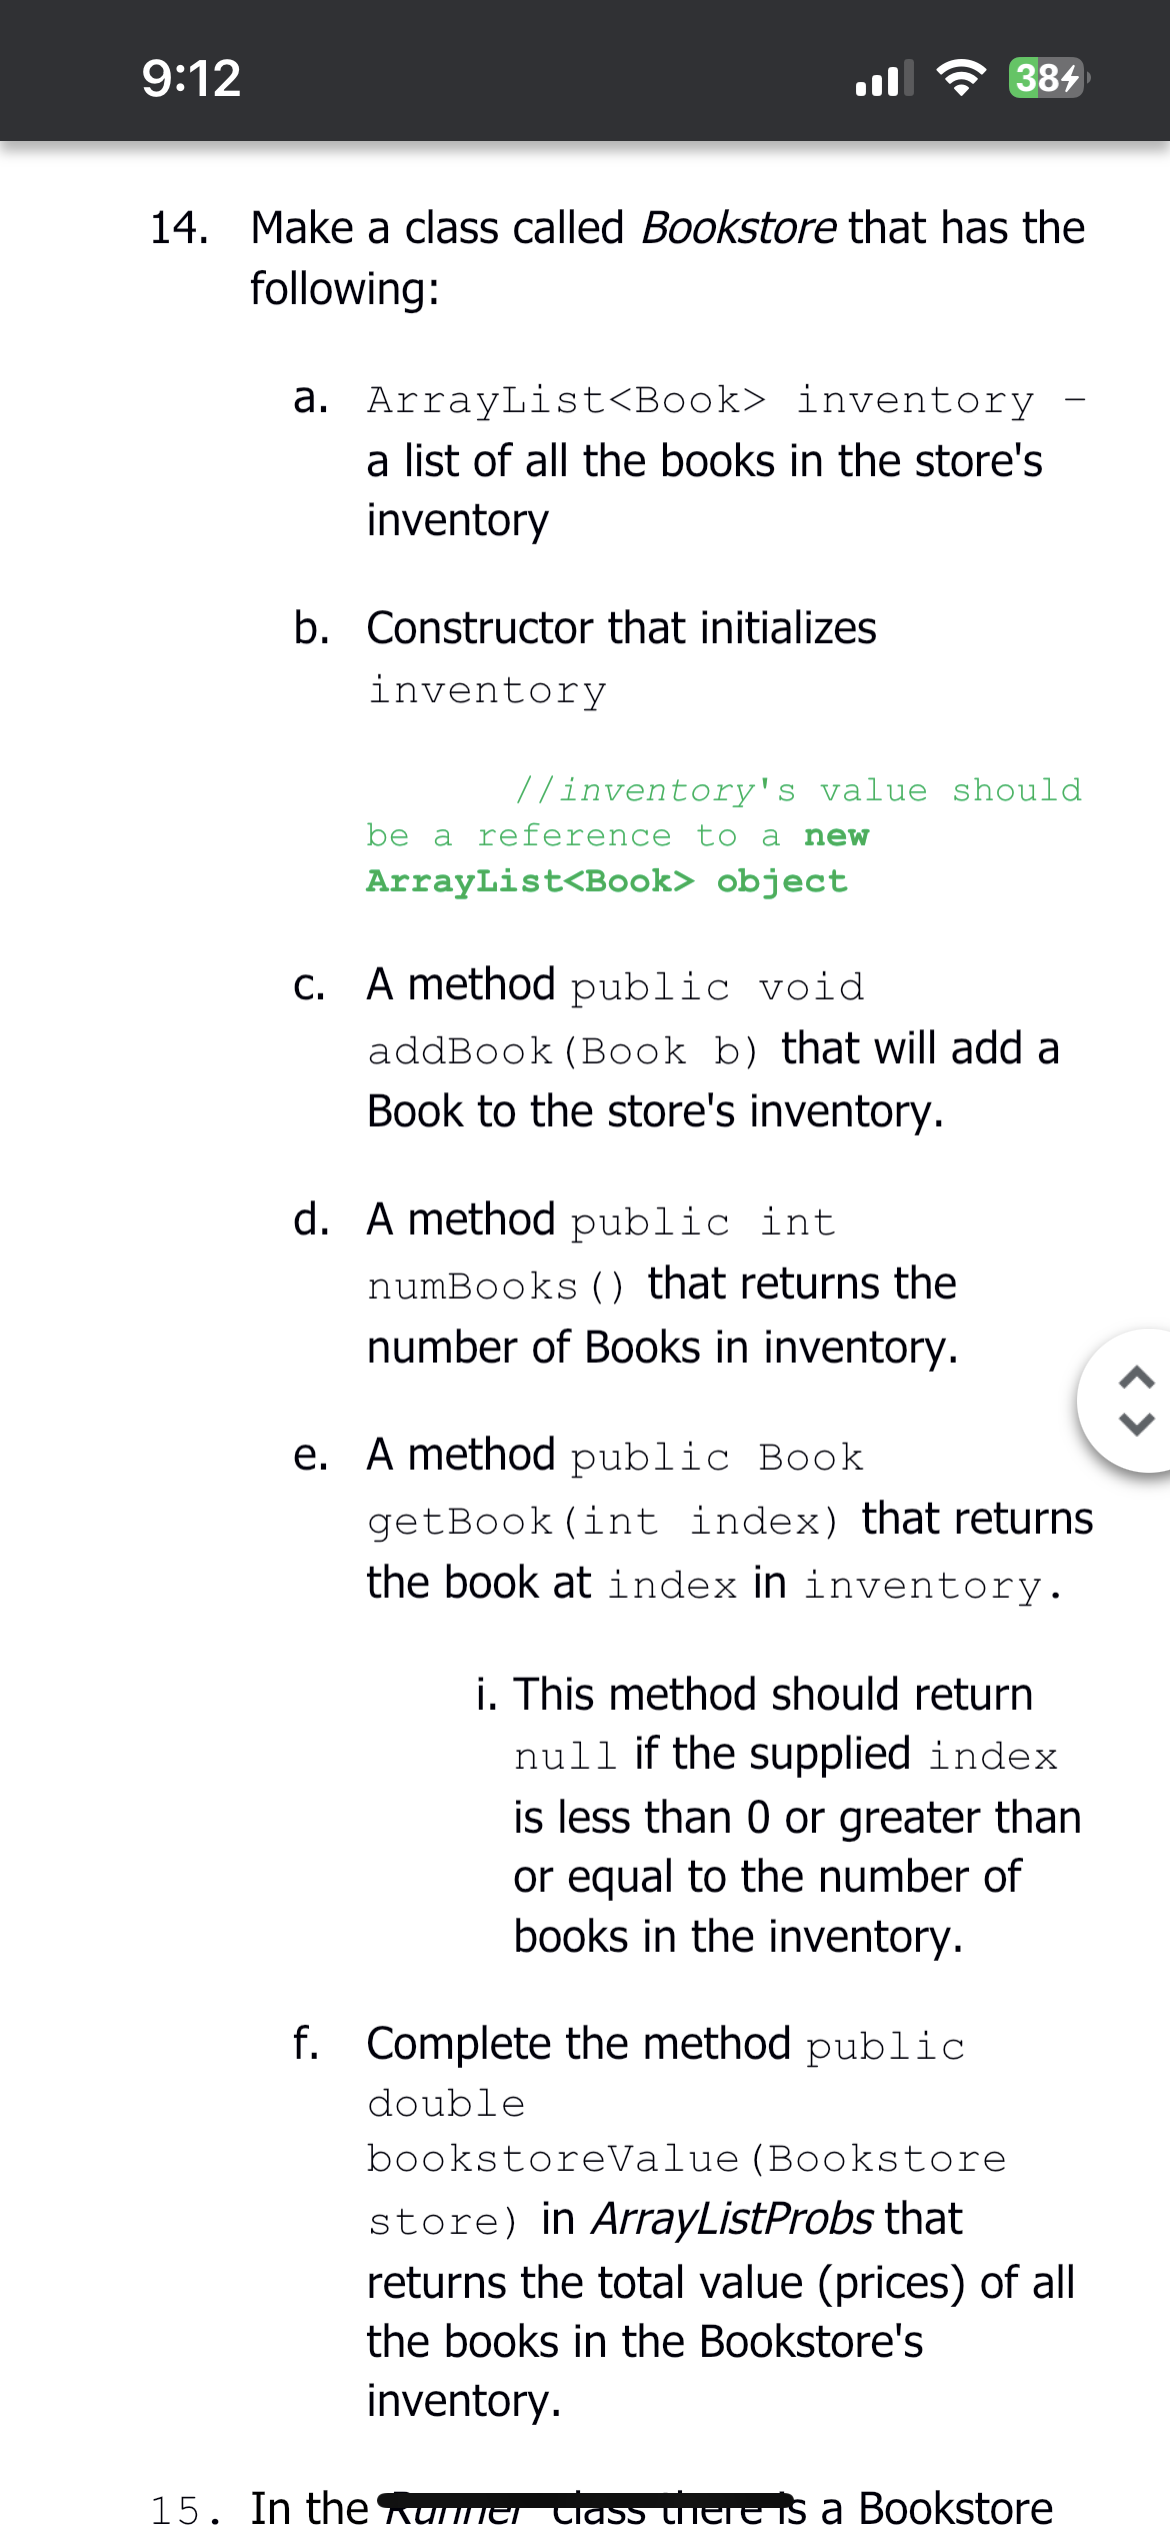 9:12
14. Make a class called Bookstore that has the
following:
a. ArrayList<Book> inventory
a list of all the books in the store's
inventory
b. Constructor that initializes
inventory
//inventory's value should
be a reference to a new
ArrayList<Book> object
c. A method public void
384
addBook (Book b) that will add a
Book to the store's inventory.
d. A method public int
numBooks () that returns the
number of Books in inventory.
e. A method public Book
getBook (int index) that returns
the book at index in inventory.
i. This method should return
null if the supplied index
is less than 0 or greater than
or equal to the number of
books in the inventory.
f. Complete the method public
double
bookstoreValue (Bookstore
store) in ArrayListProbs that
returns the total value (prices) of all
the books in the Bookstore's
inventory.
15. In the Runner class there is a Bookstore
<>